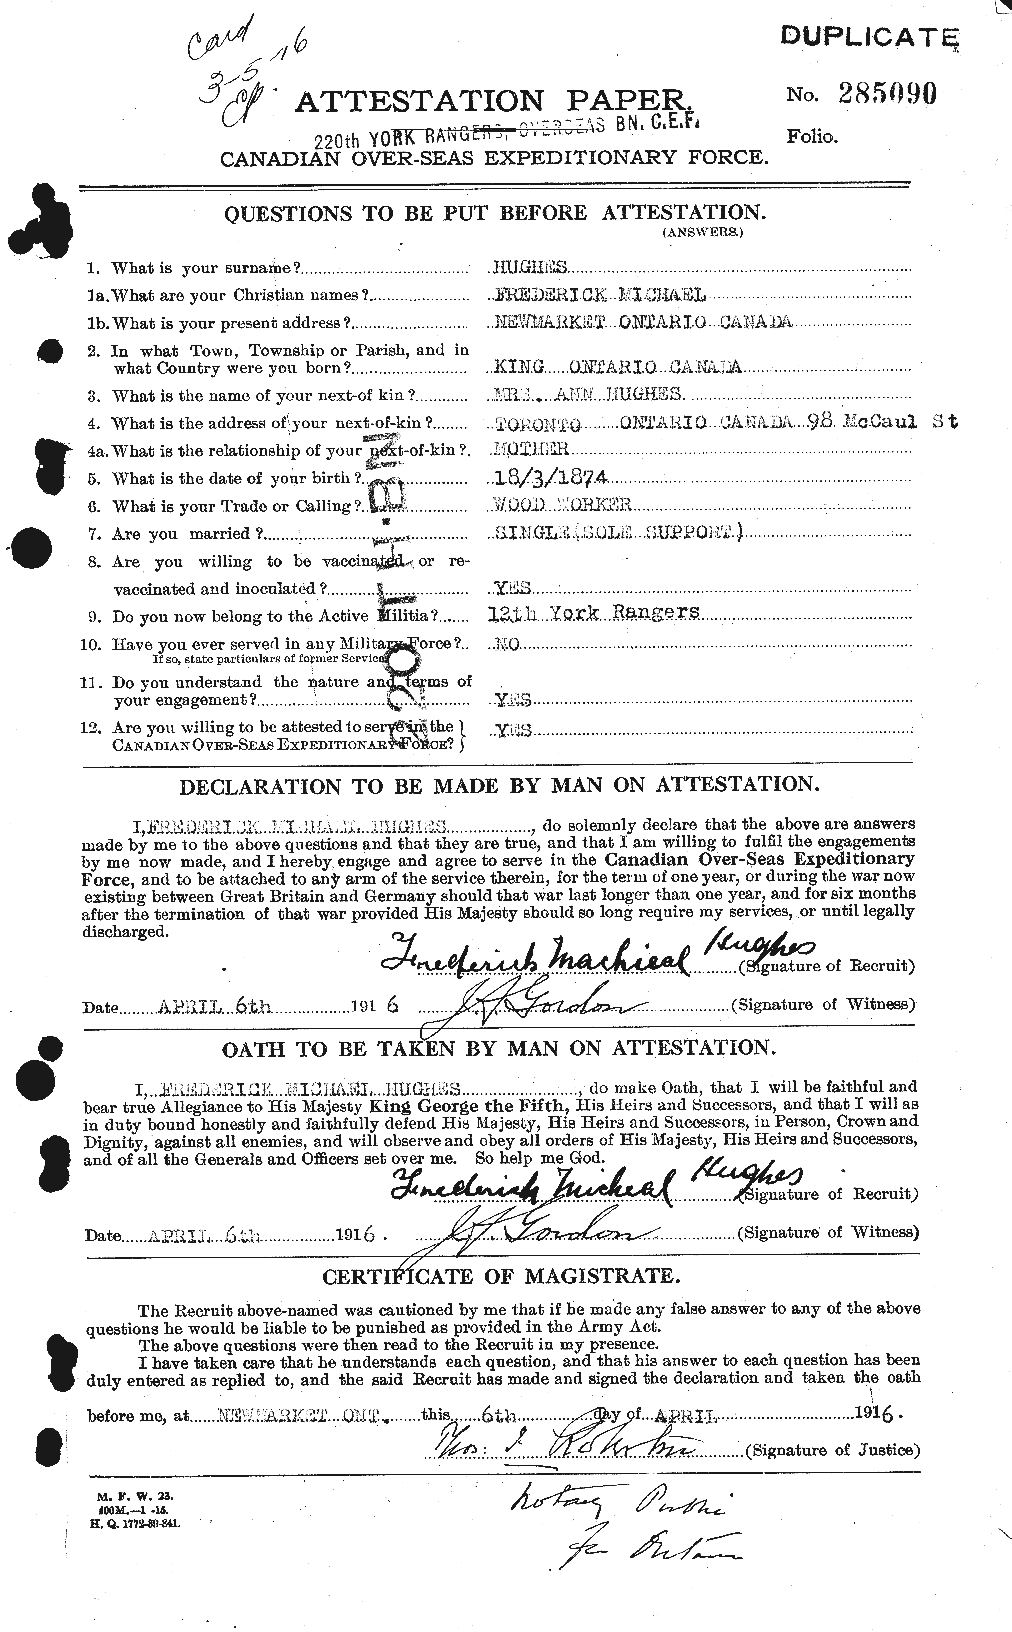 Personnel Records of the First World War - CEF 403801a